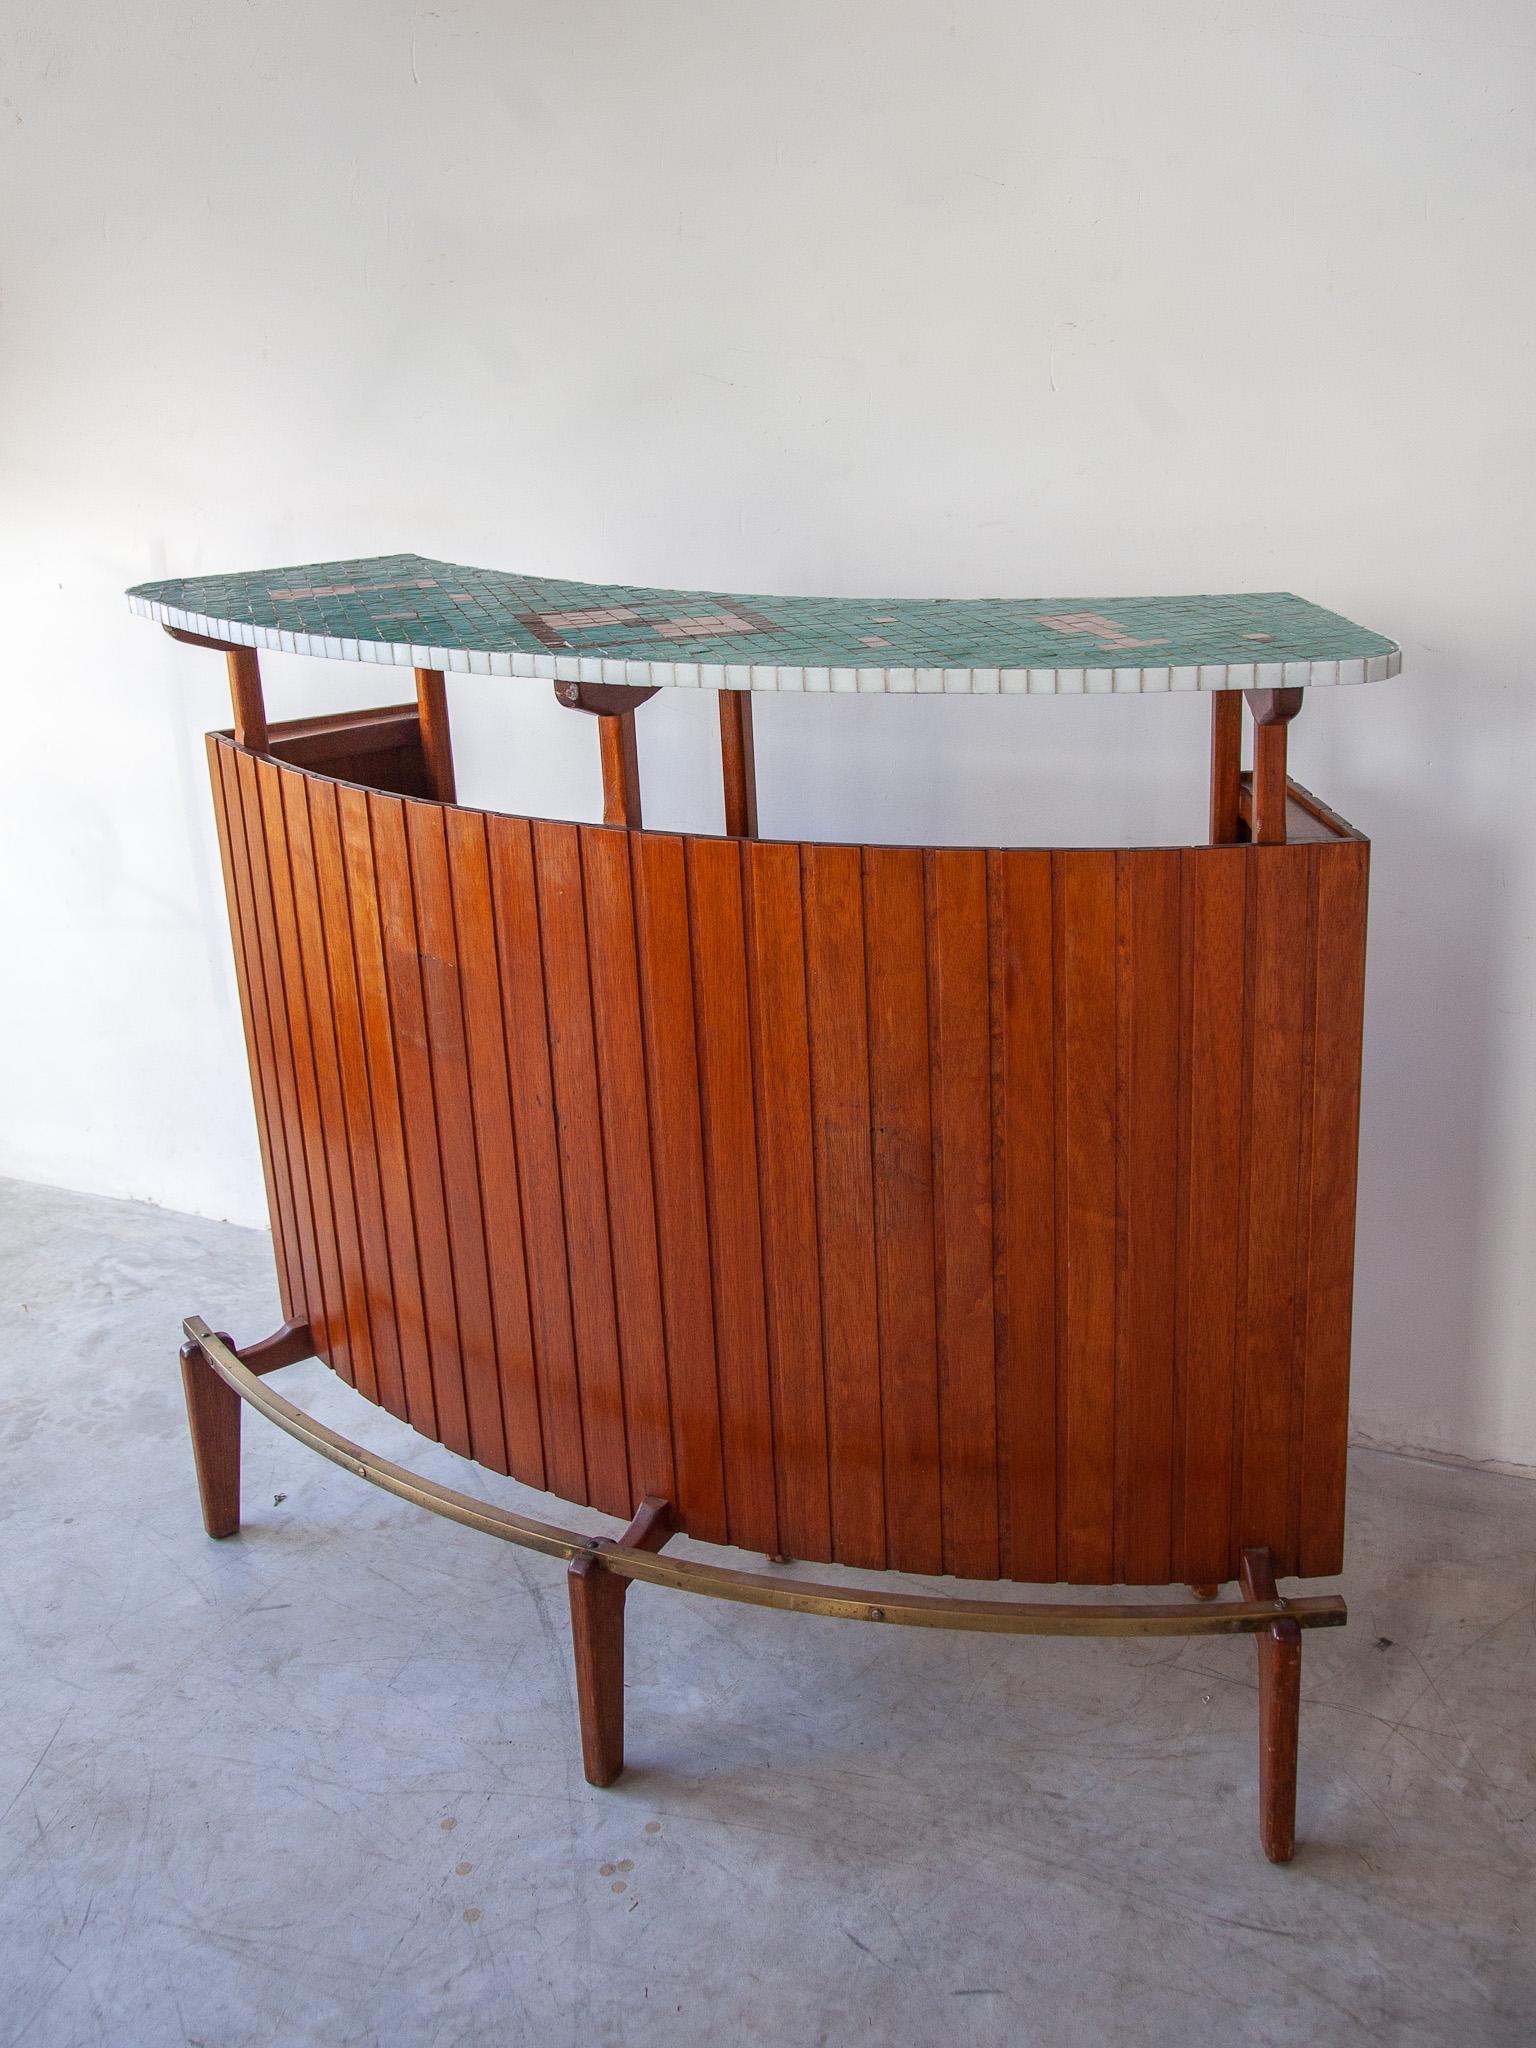 Vintage counter bar in solid teak with ceramic mosaic top and brass footrest. The design drink bar has a rounded shape and a front covered with solid teak slats.

Ideally placed in a corner, off your living room or office even a beautiful piece